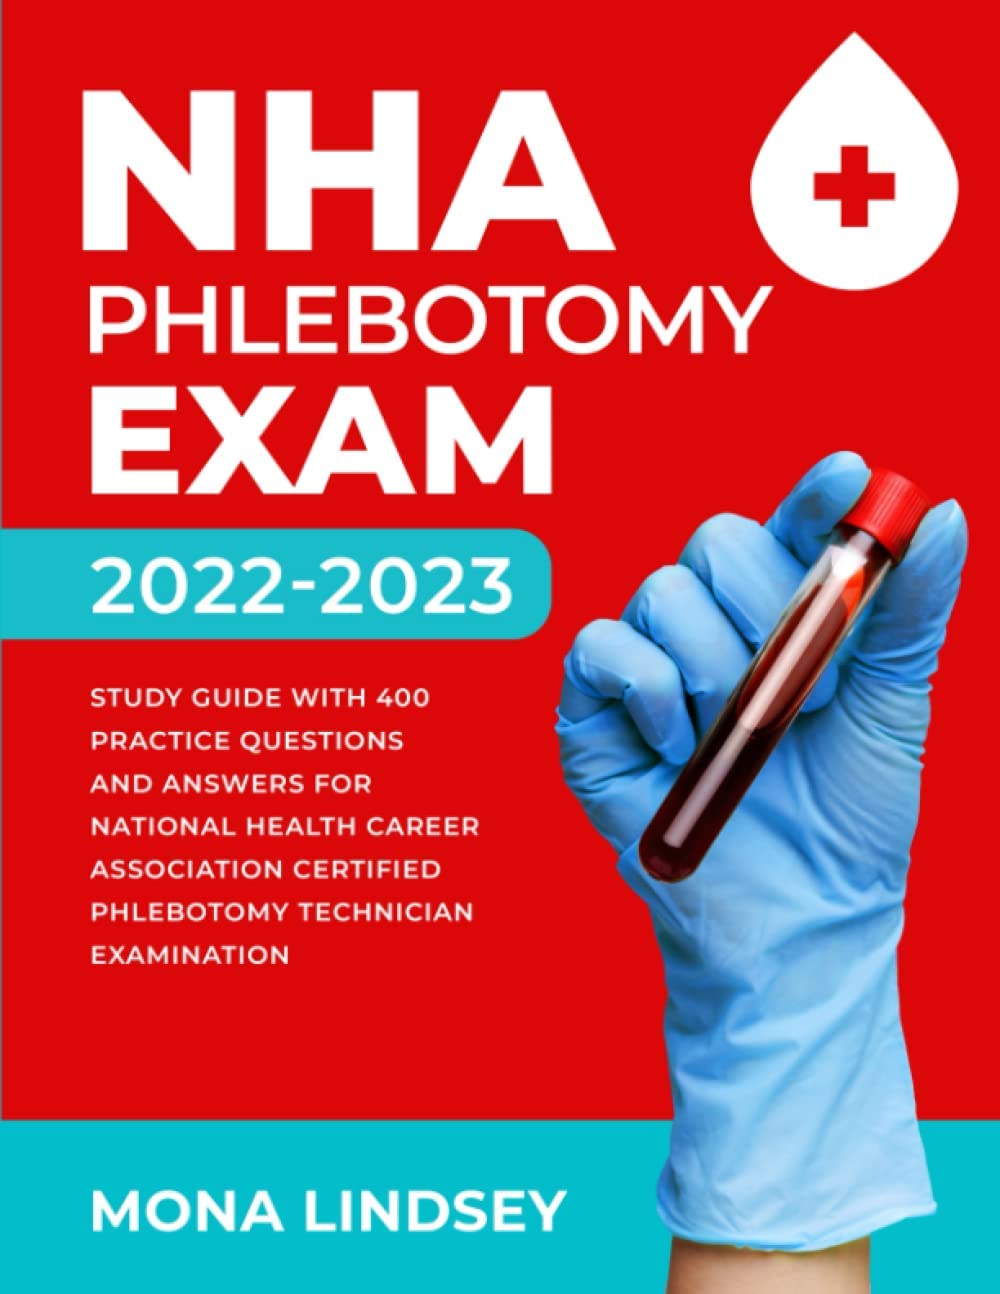 NHA Phlebotomy Exam 2022-2023: Study Guide with 400 Practice Questions and Answers for National Healthcareer Association Certified Phlebotomy Technician Examination